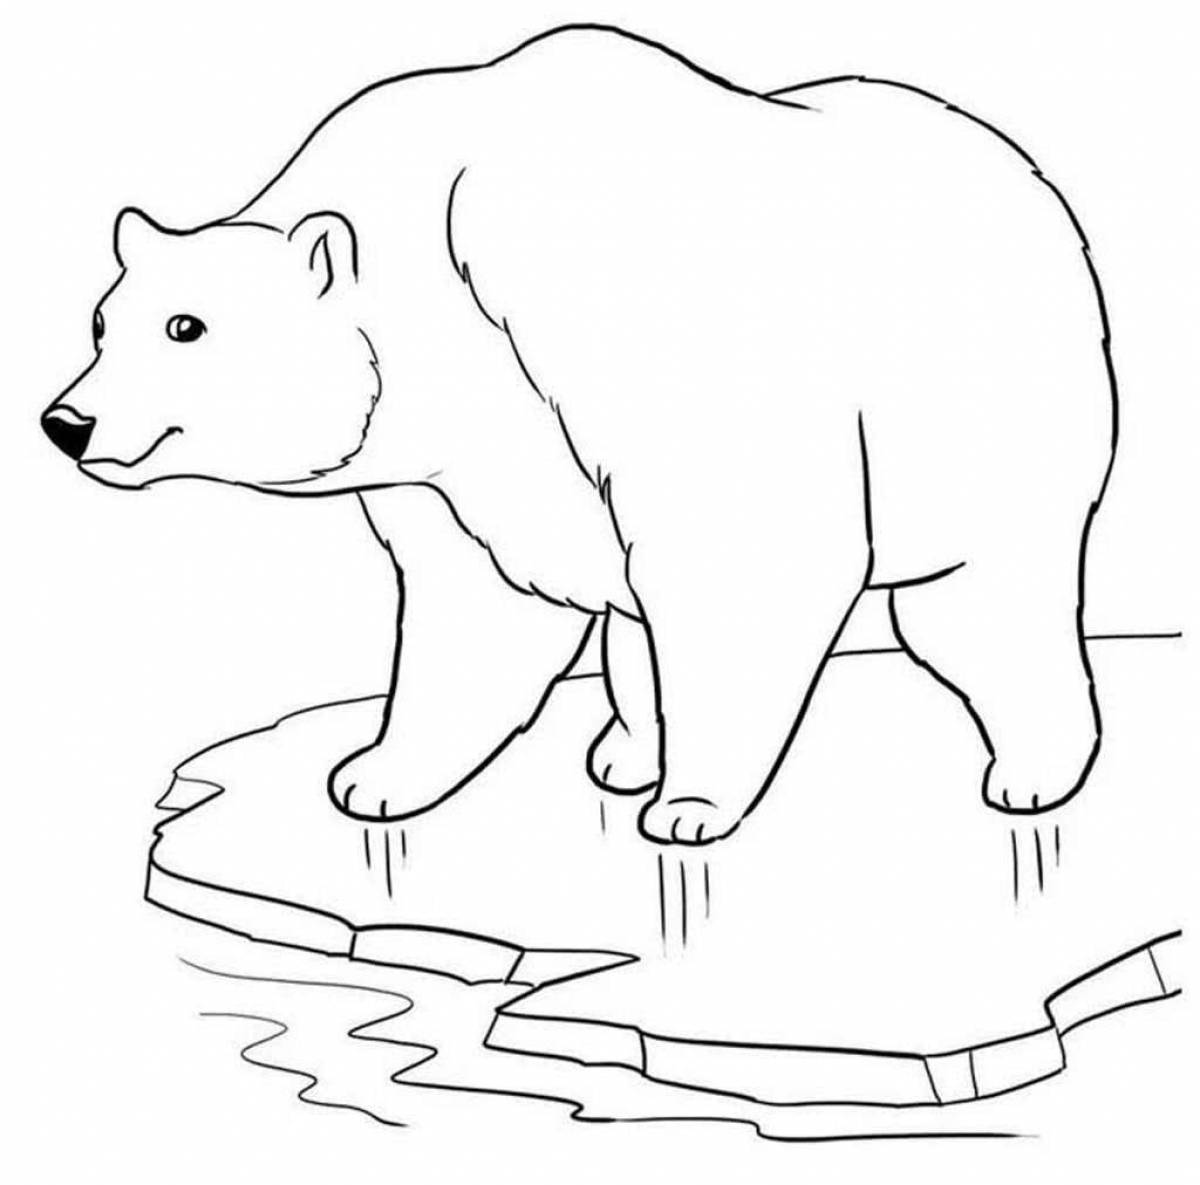 Wonderful polar bear coloring book for kids 2-3 years old